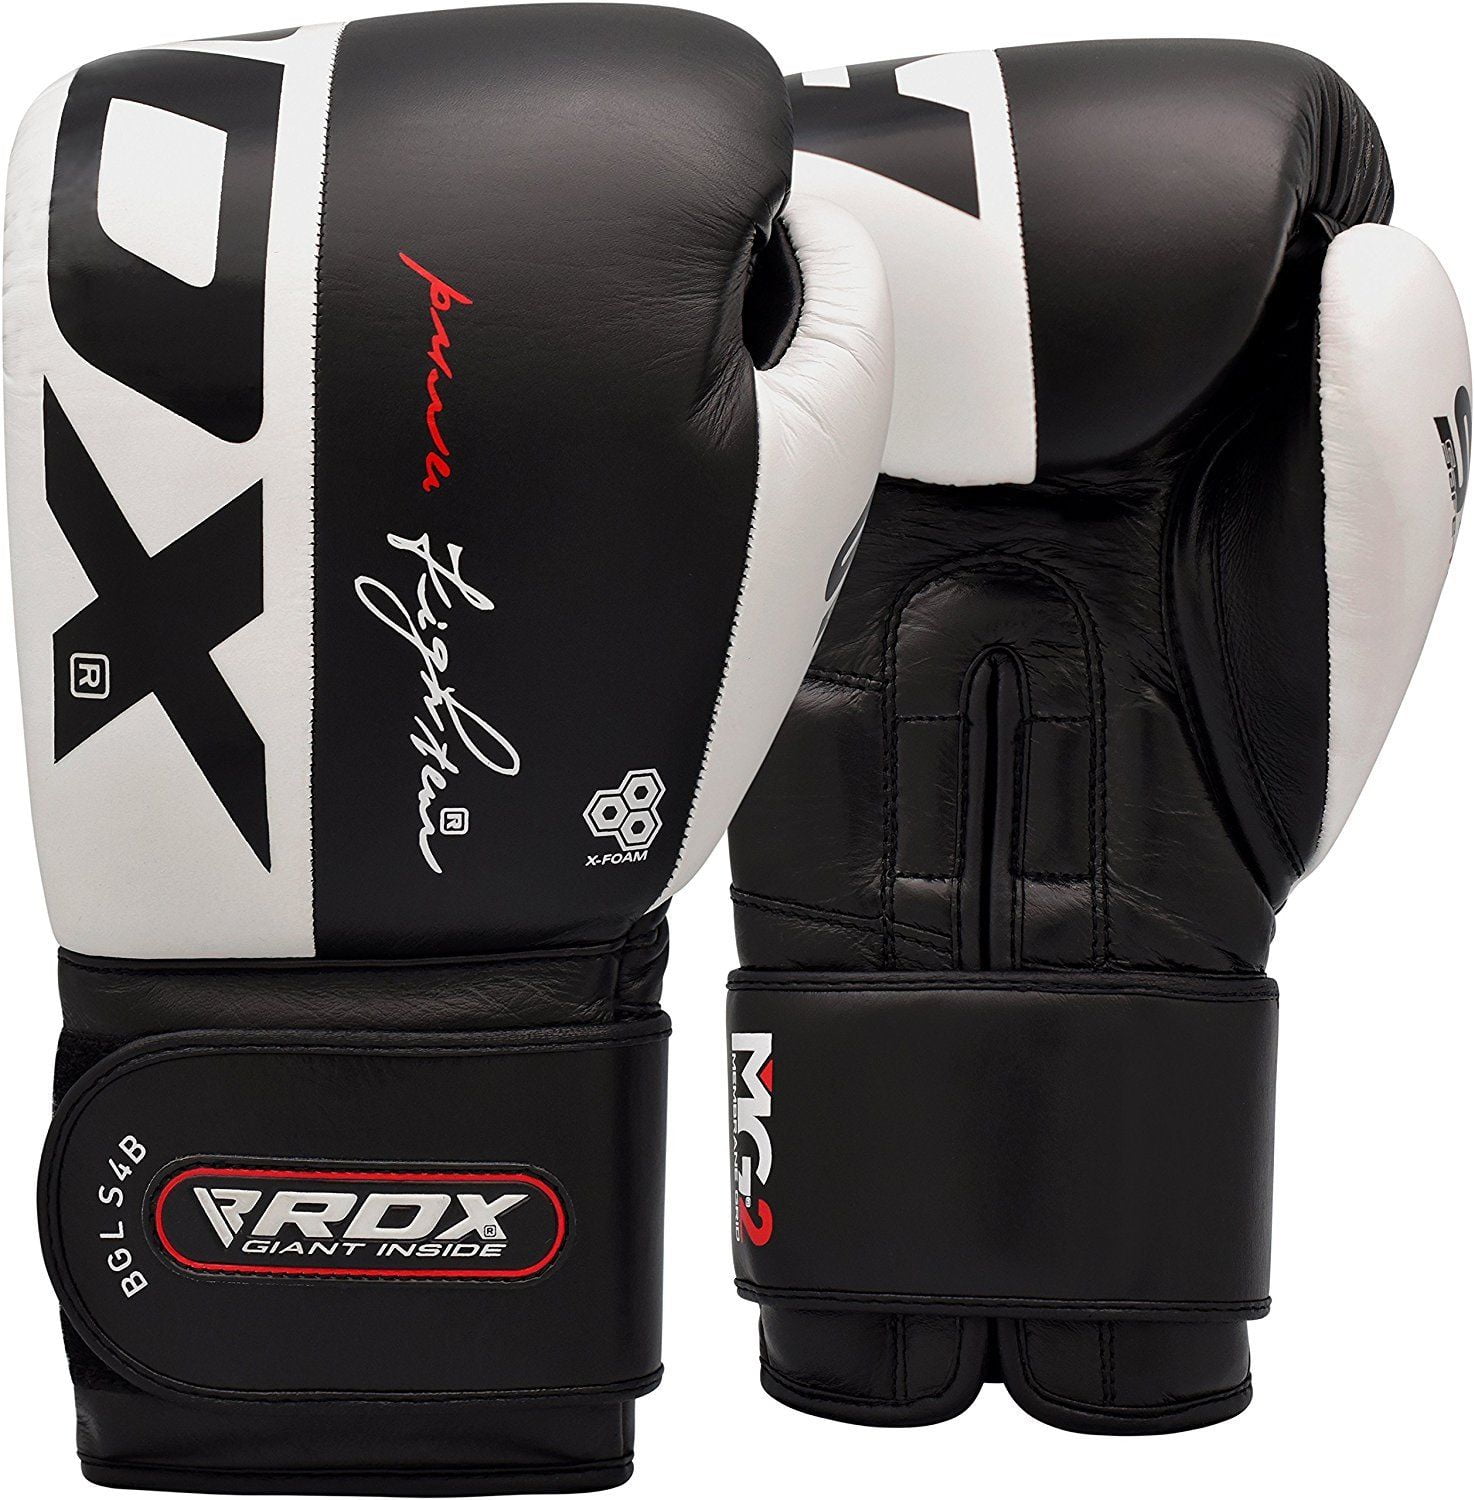 RDX Boxing Gloves Training Muay Thai Sparring Kickboxing Mitts Fighting Punching 